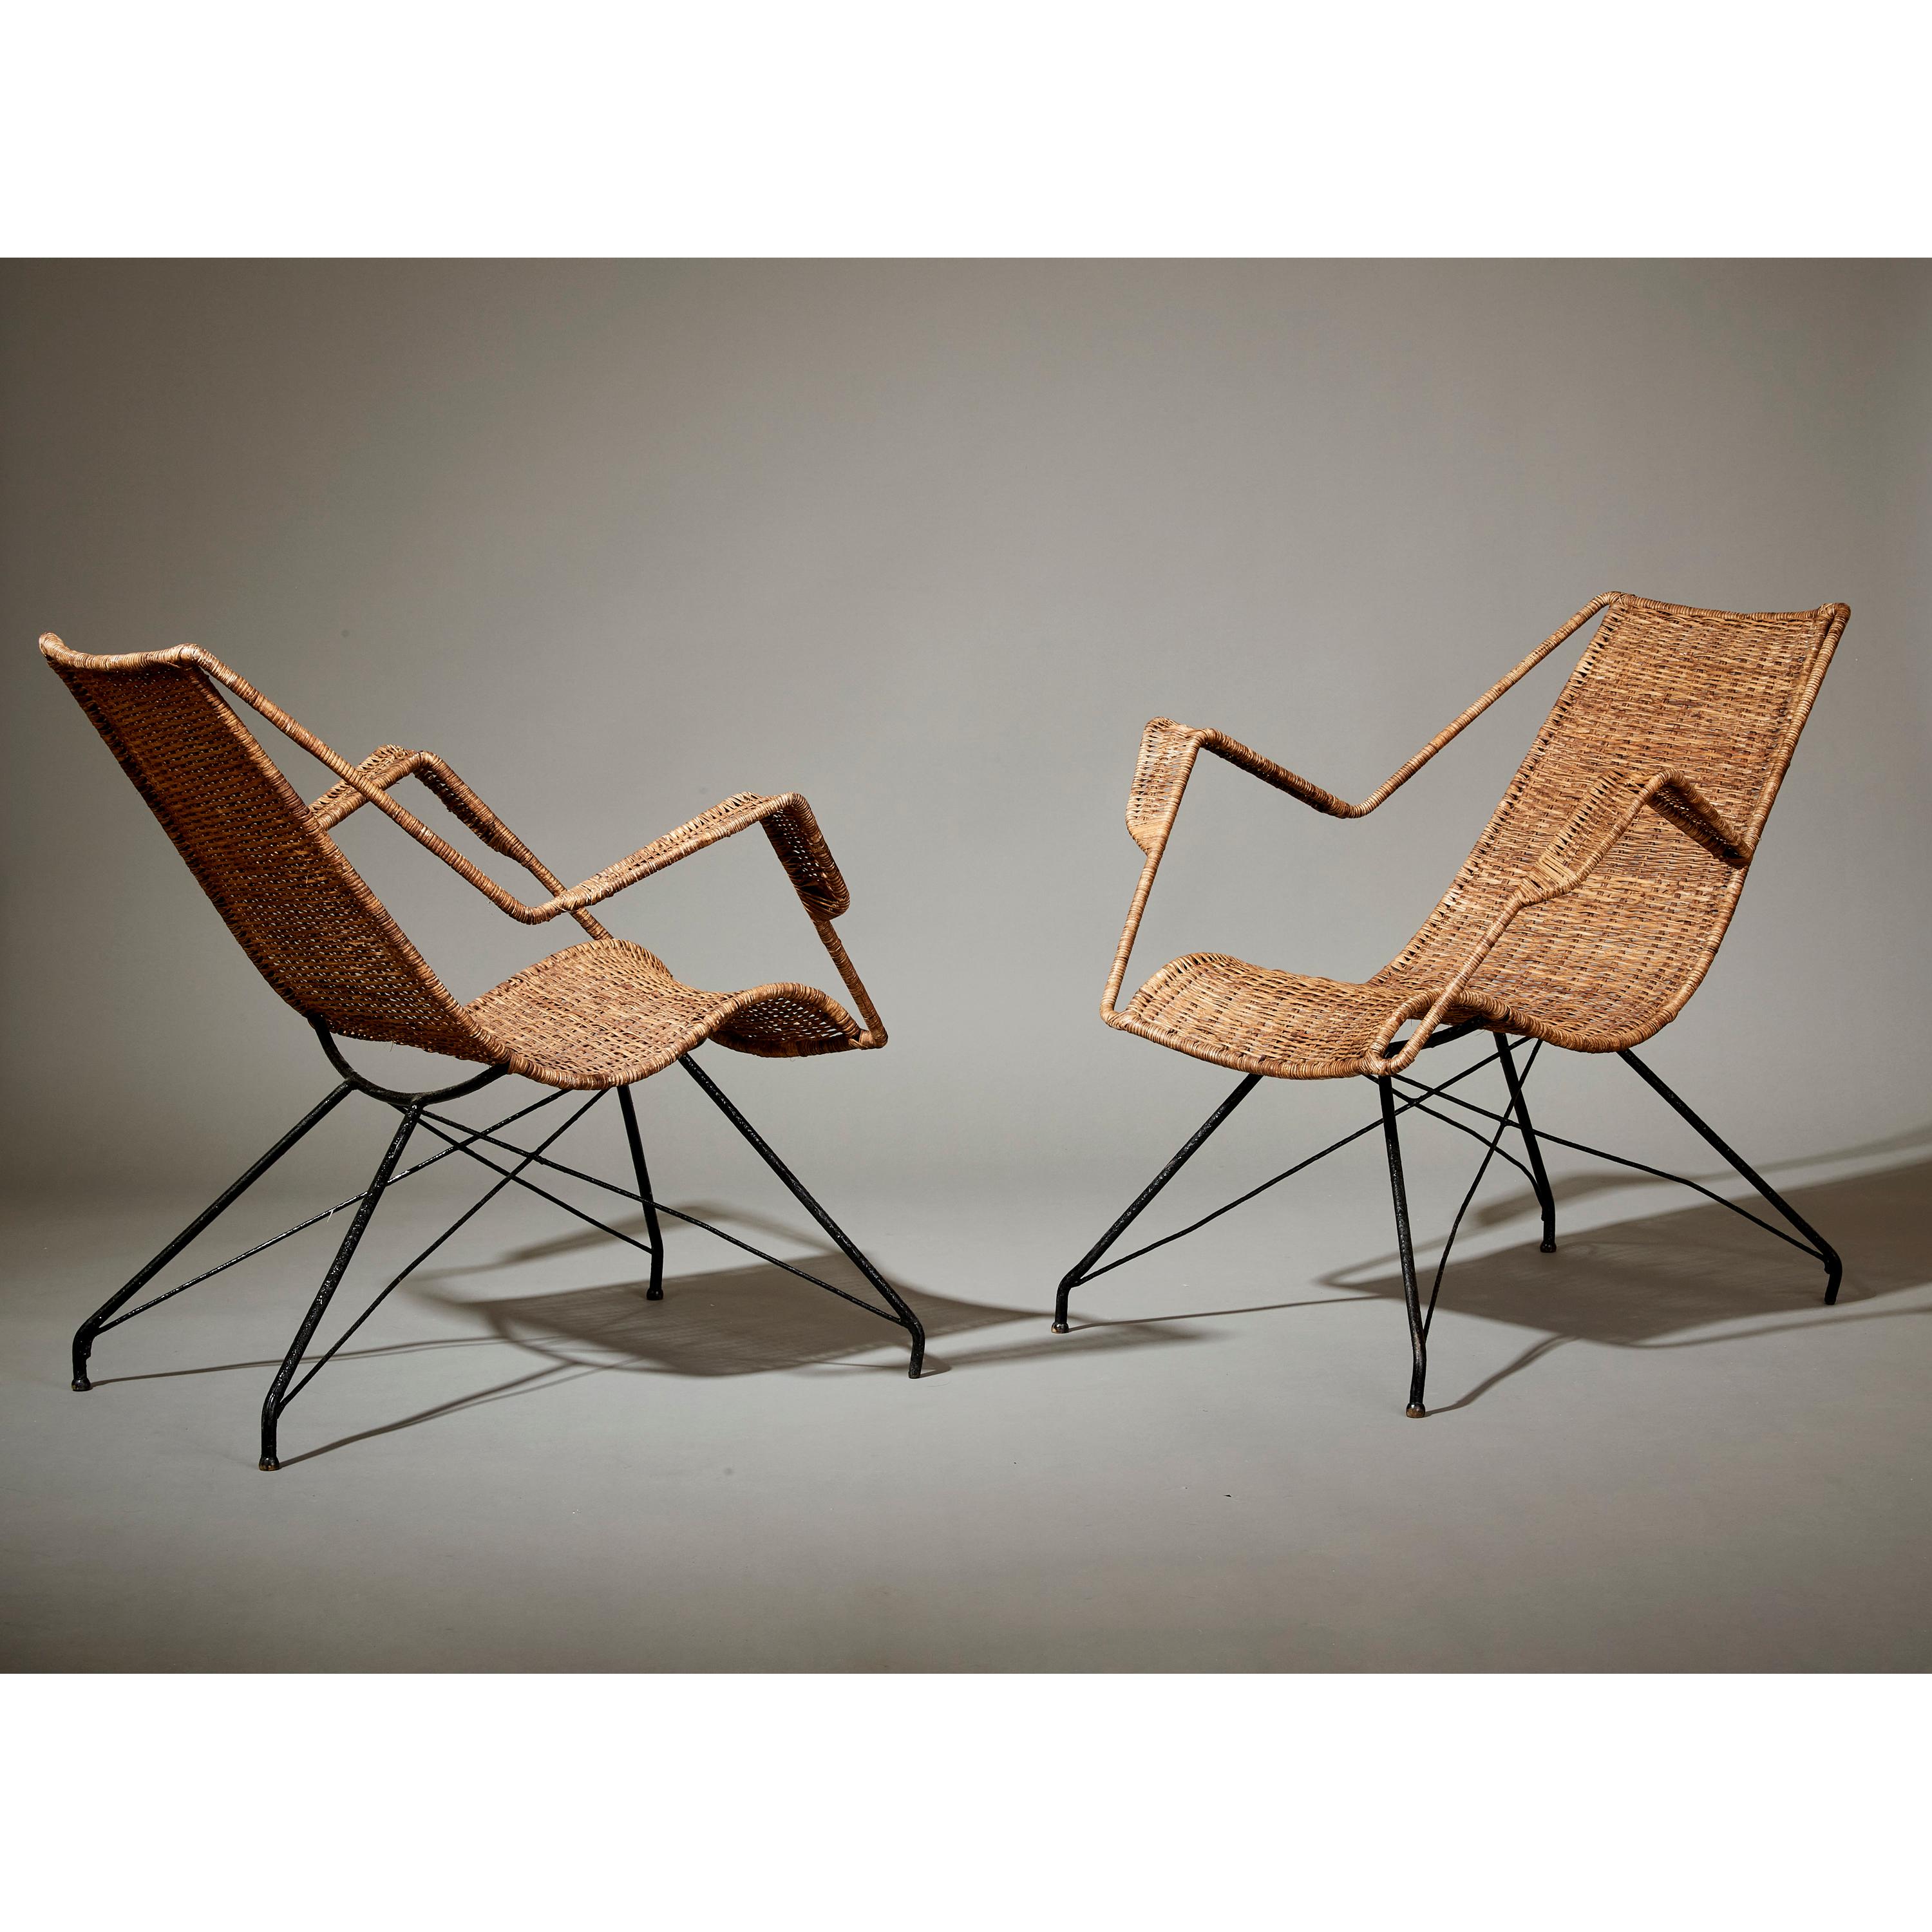 Martin Eisler and Carlo Hauner Rare Pair of Rattan Armchairs, Brazil, 1950 In Good Condition For Sale In New York, NY